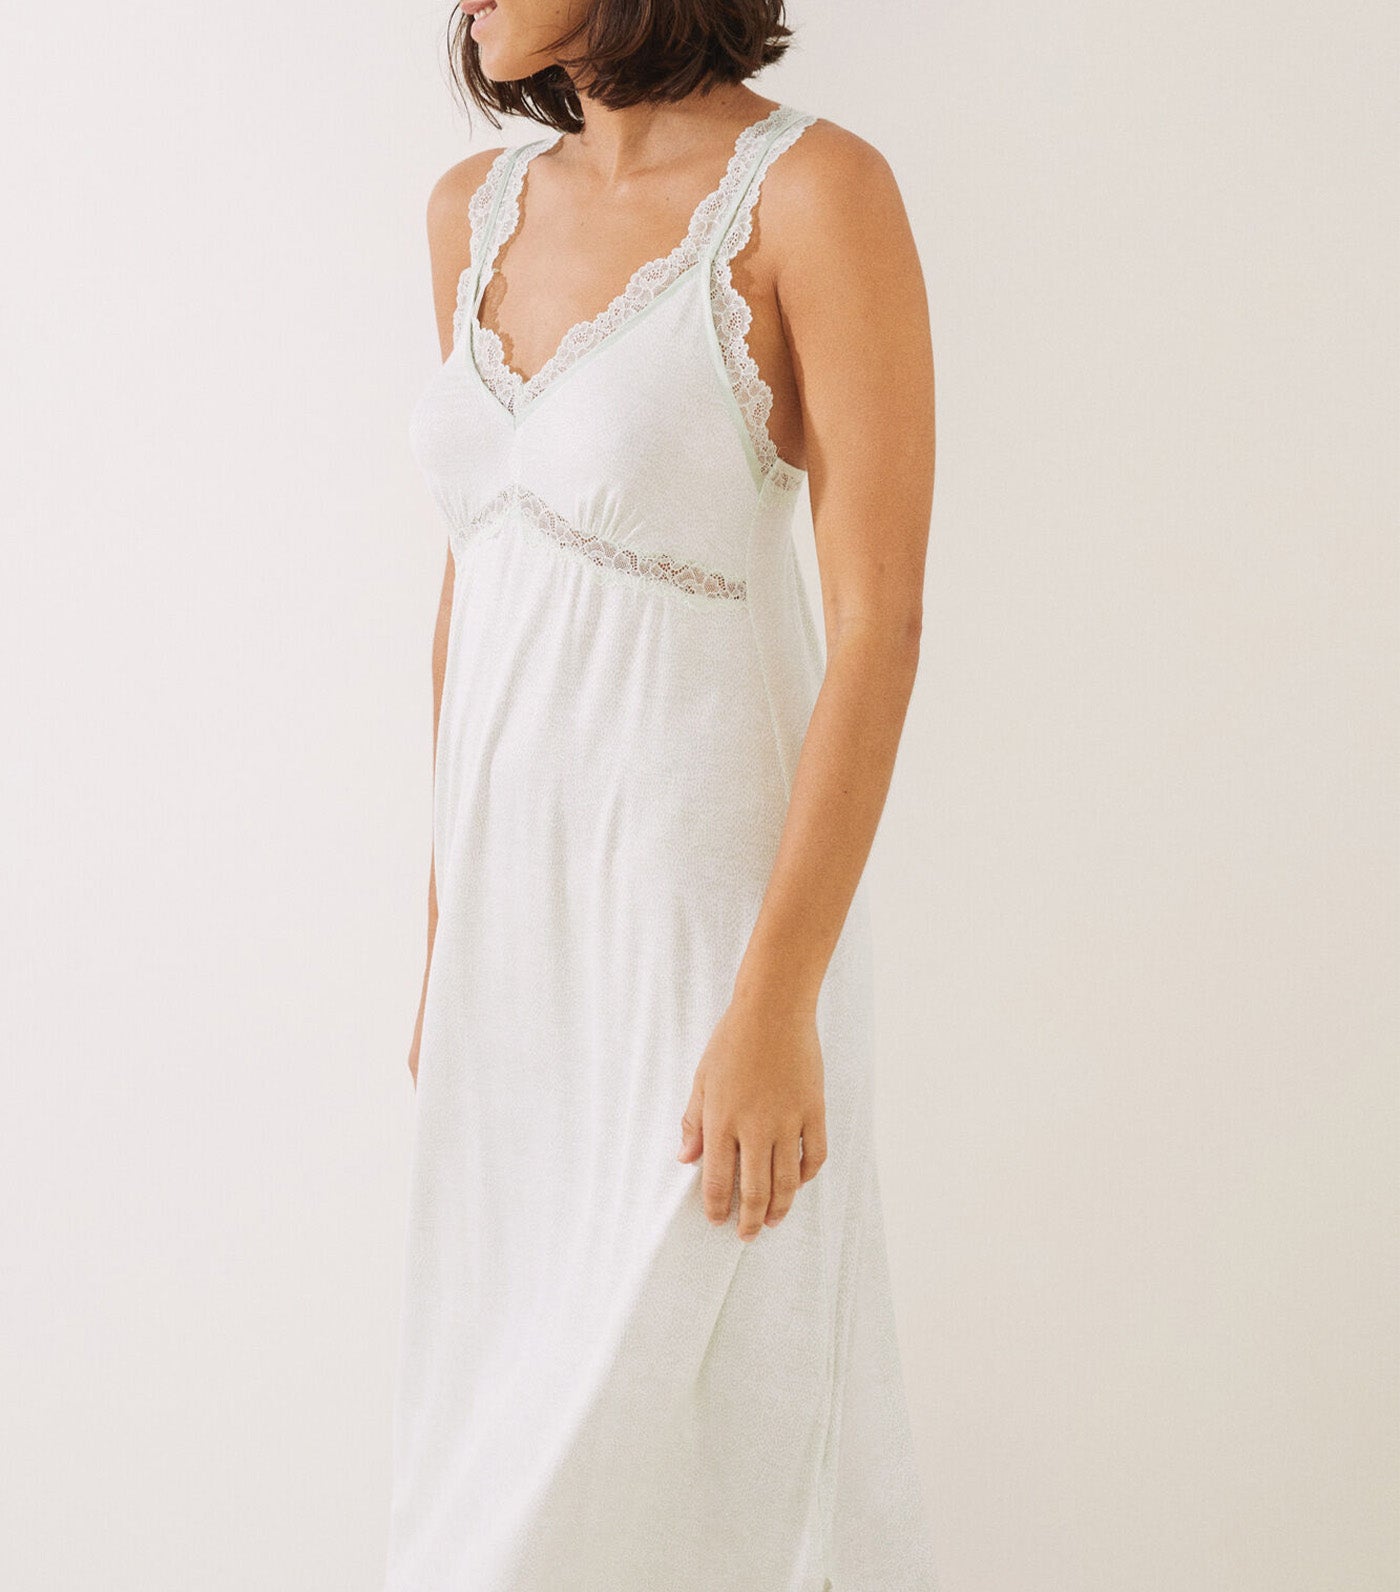 Short Cami Nightgown with Lace Trim White